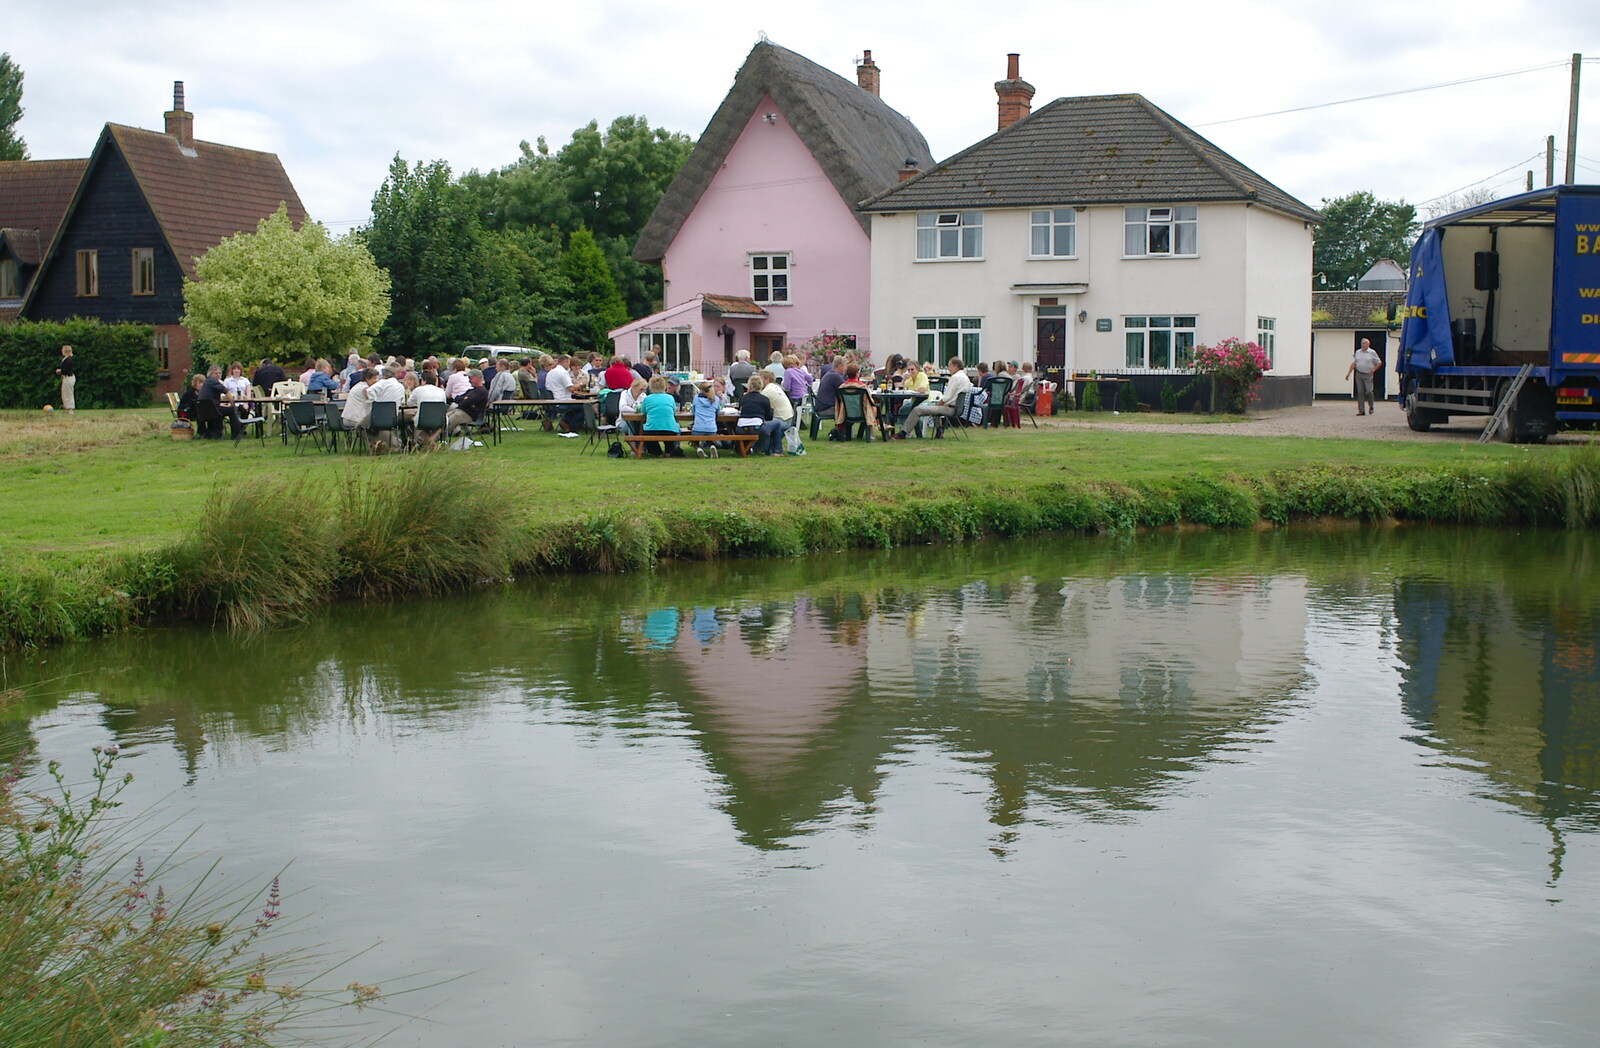 The view over the pond from A Combine Harvester and the Pig Roast, Thrandeston, Suffolk - 26th June 2005